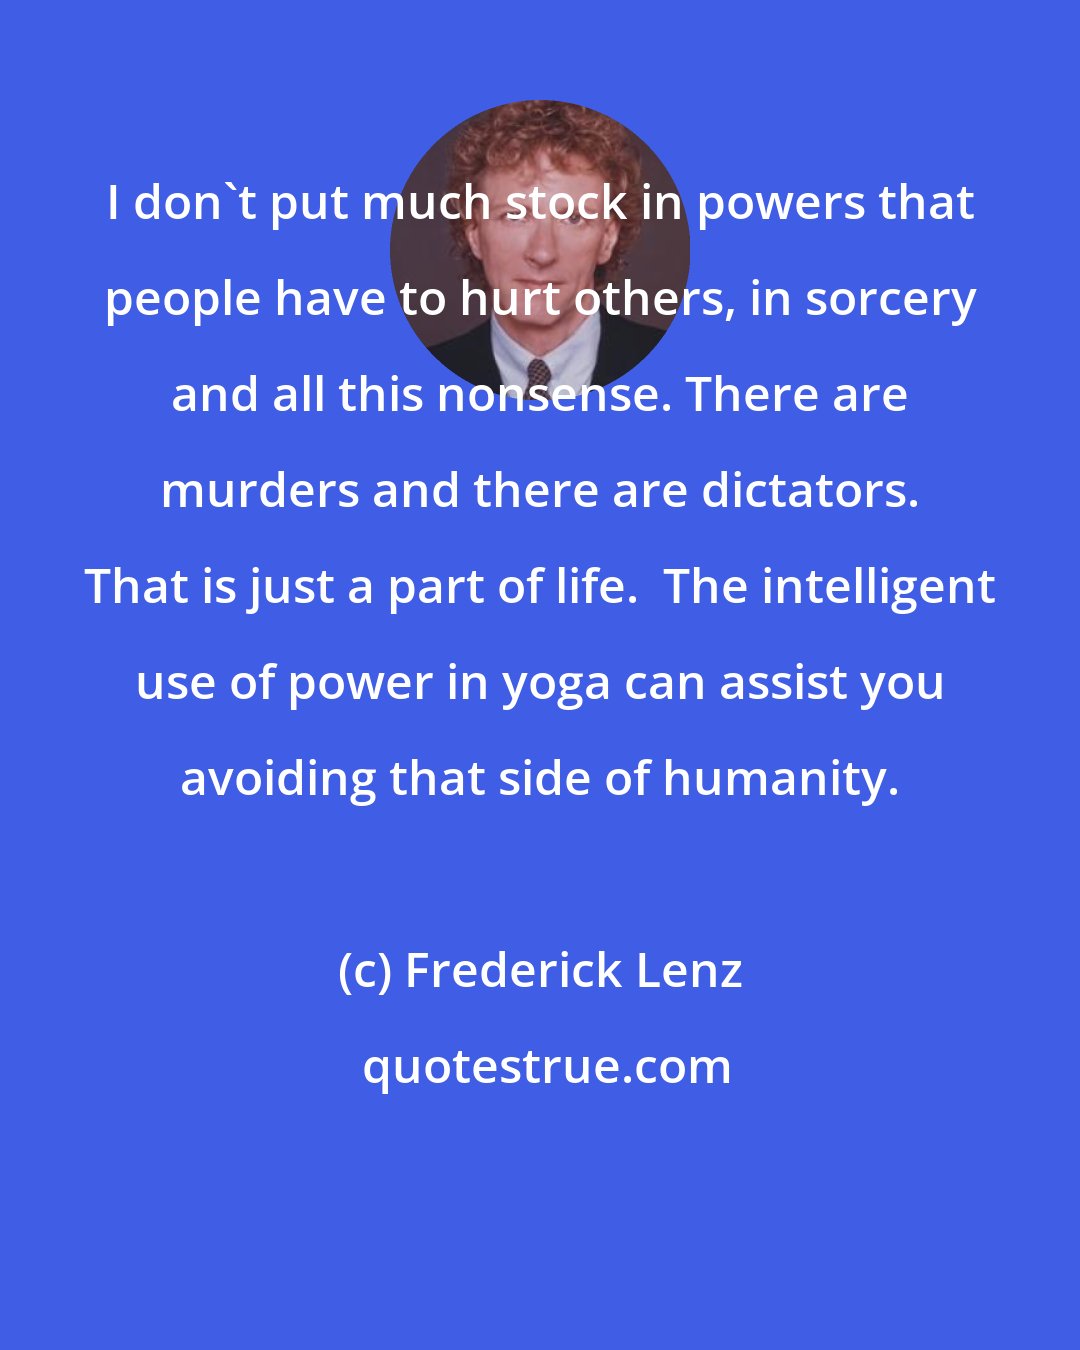 Frederick Lenz: I don't put much stock in powers that people have to hurt others, in sorcery and all this nonsense. There are murders and there are dictators. That is just a part of life.  The intelligent use of power in yoga can assist you avoiding that side of humanity.